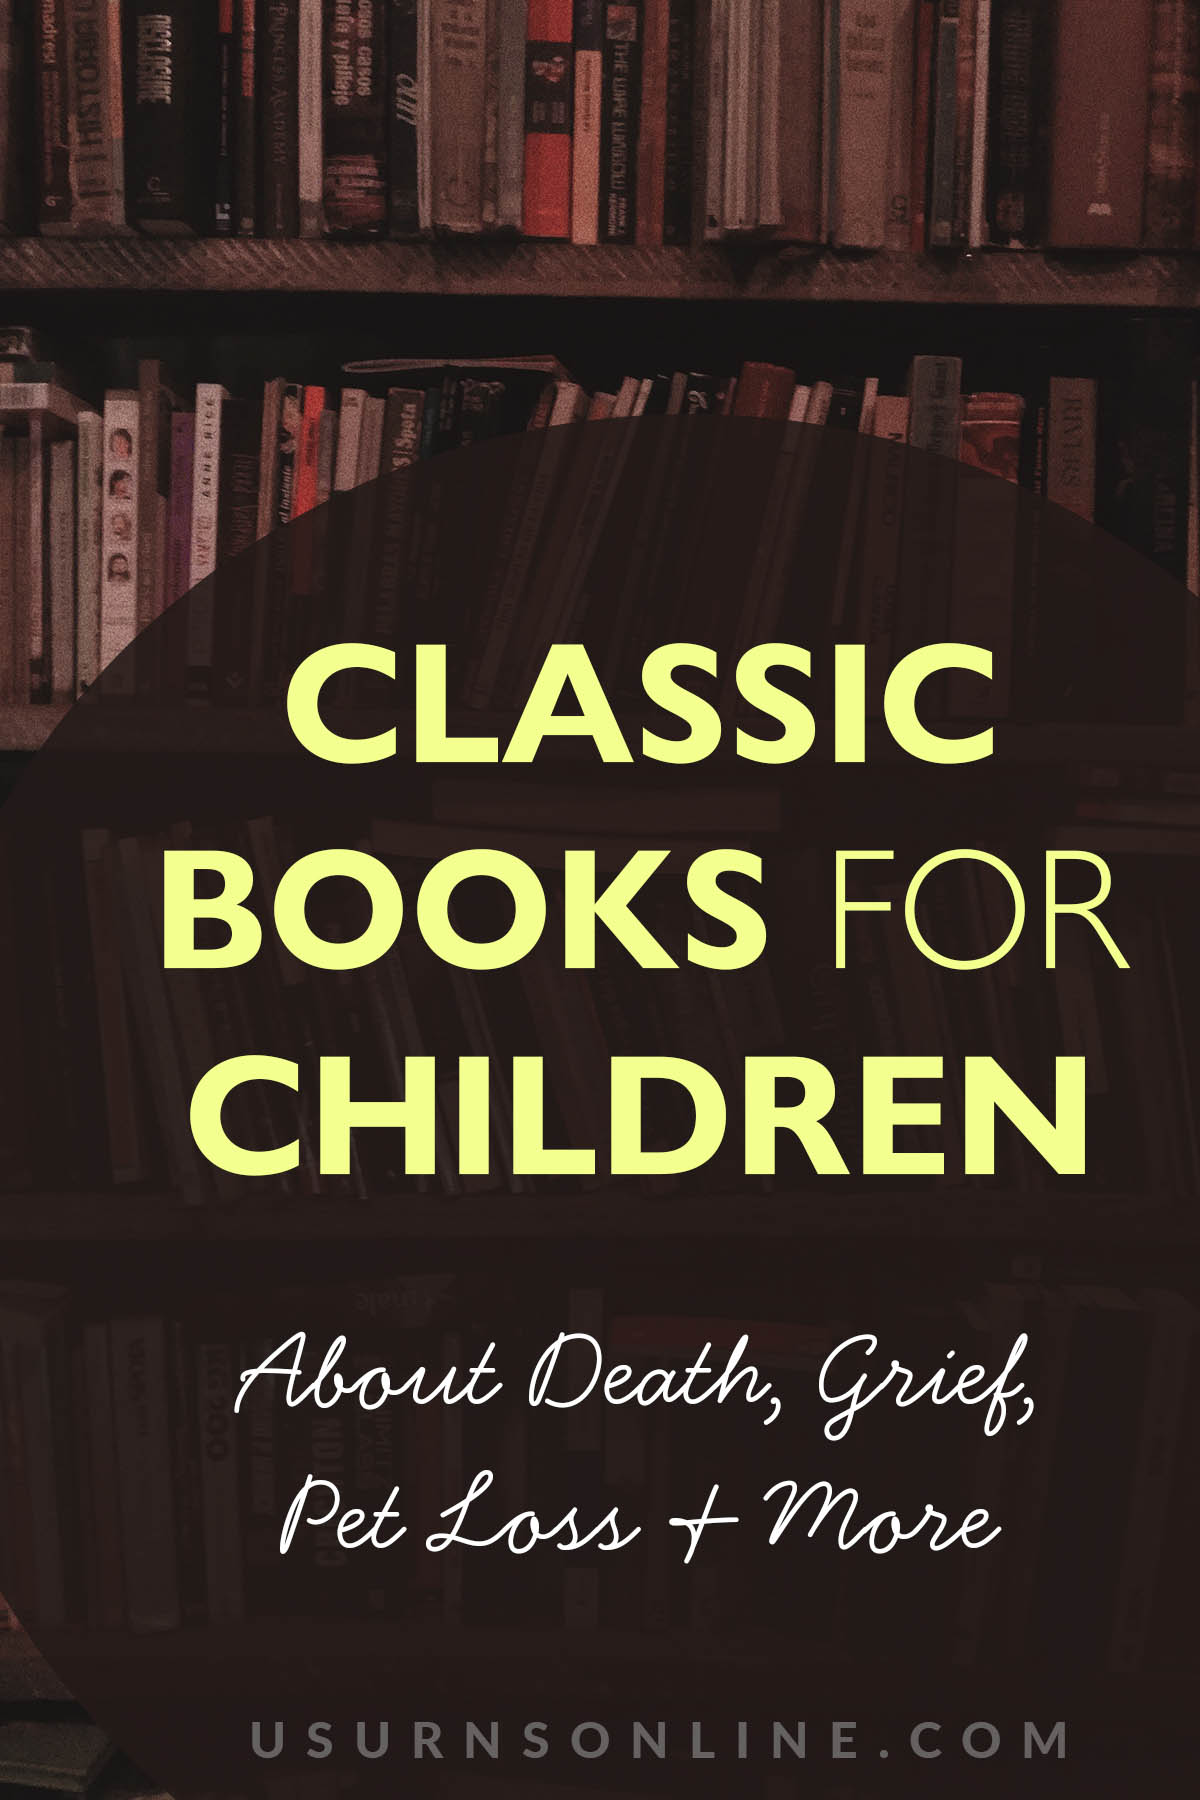 101 Timeless Children's Books About Death, Pet Loss & More » Urns | Online